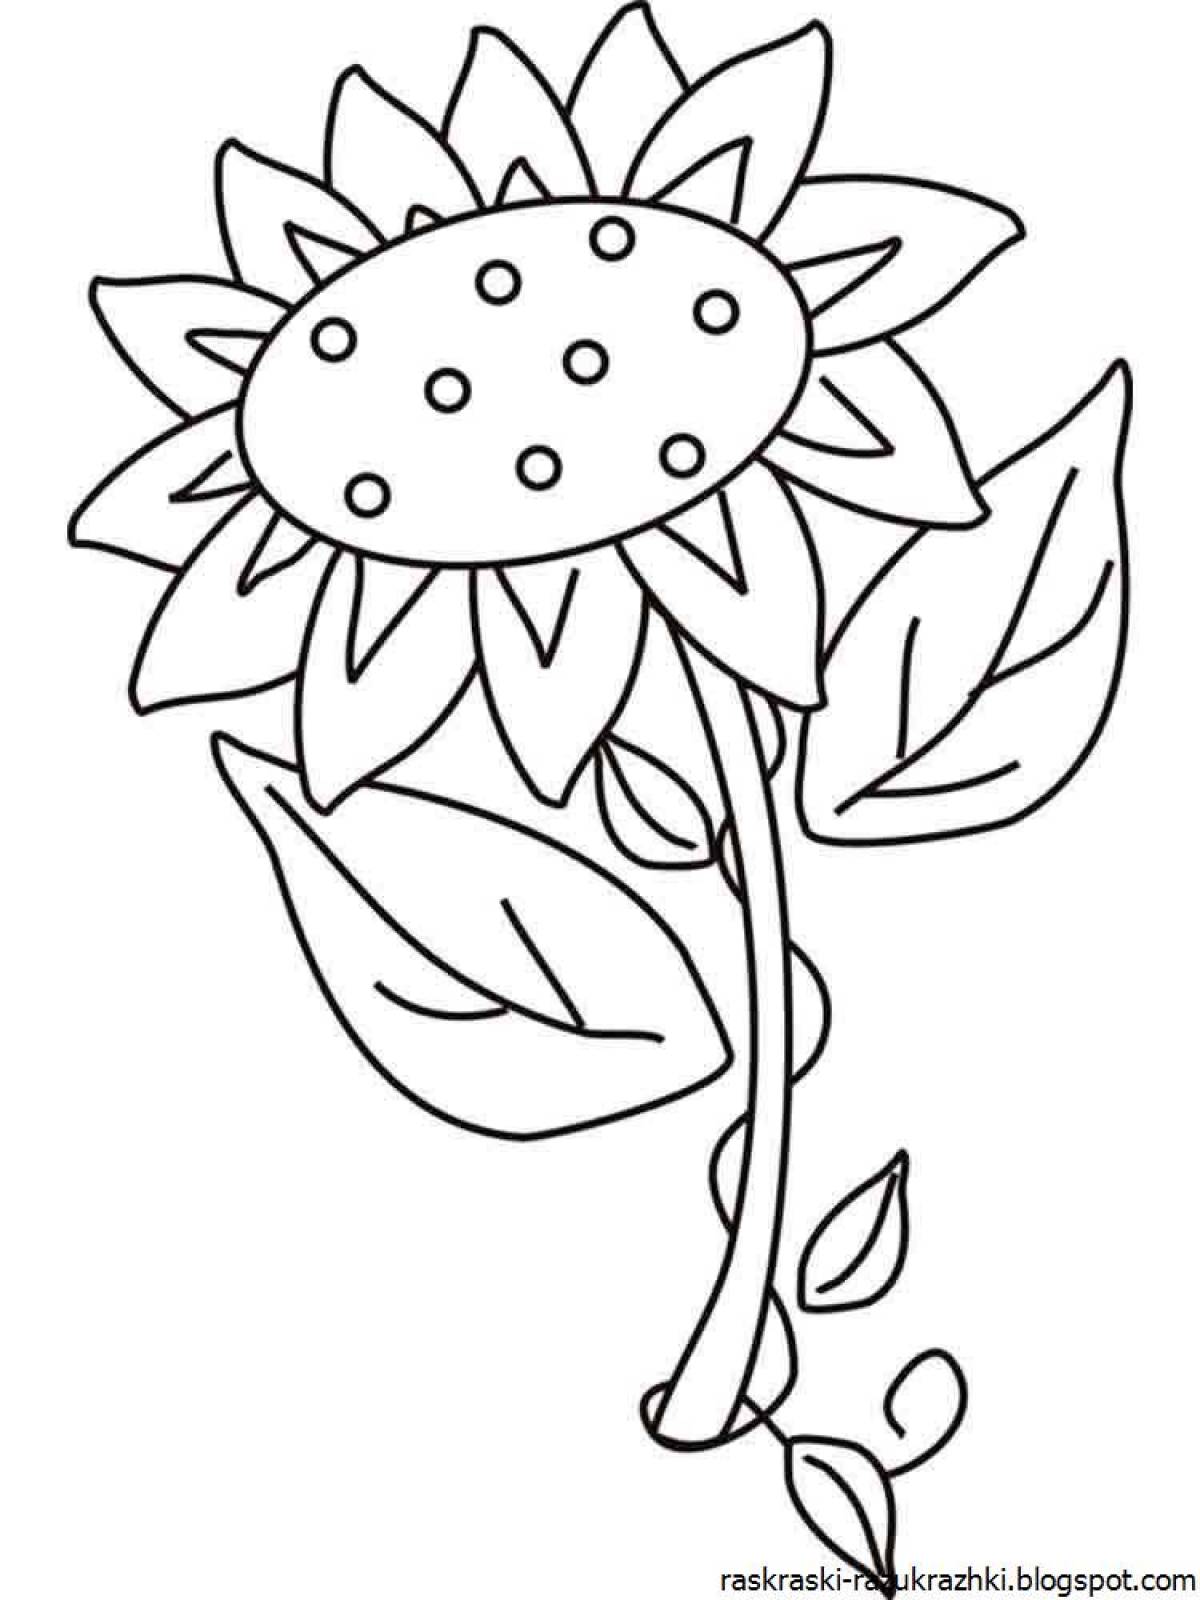 Fun flower coloring for 3-4 year olds